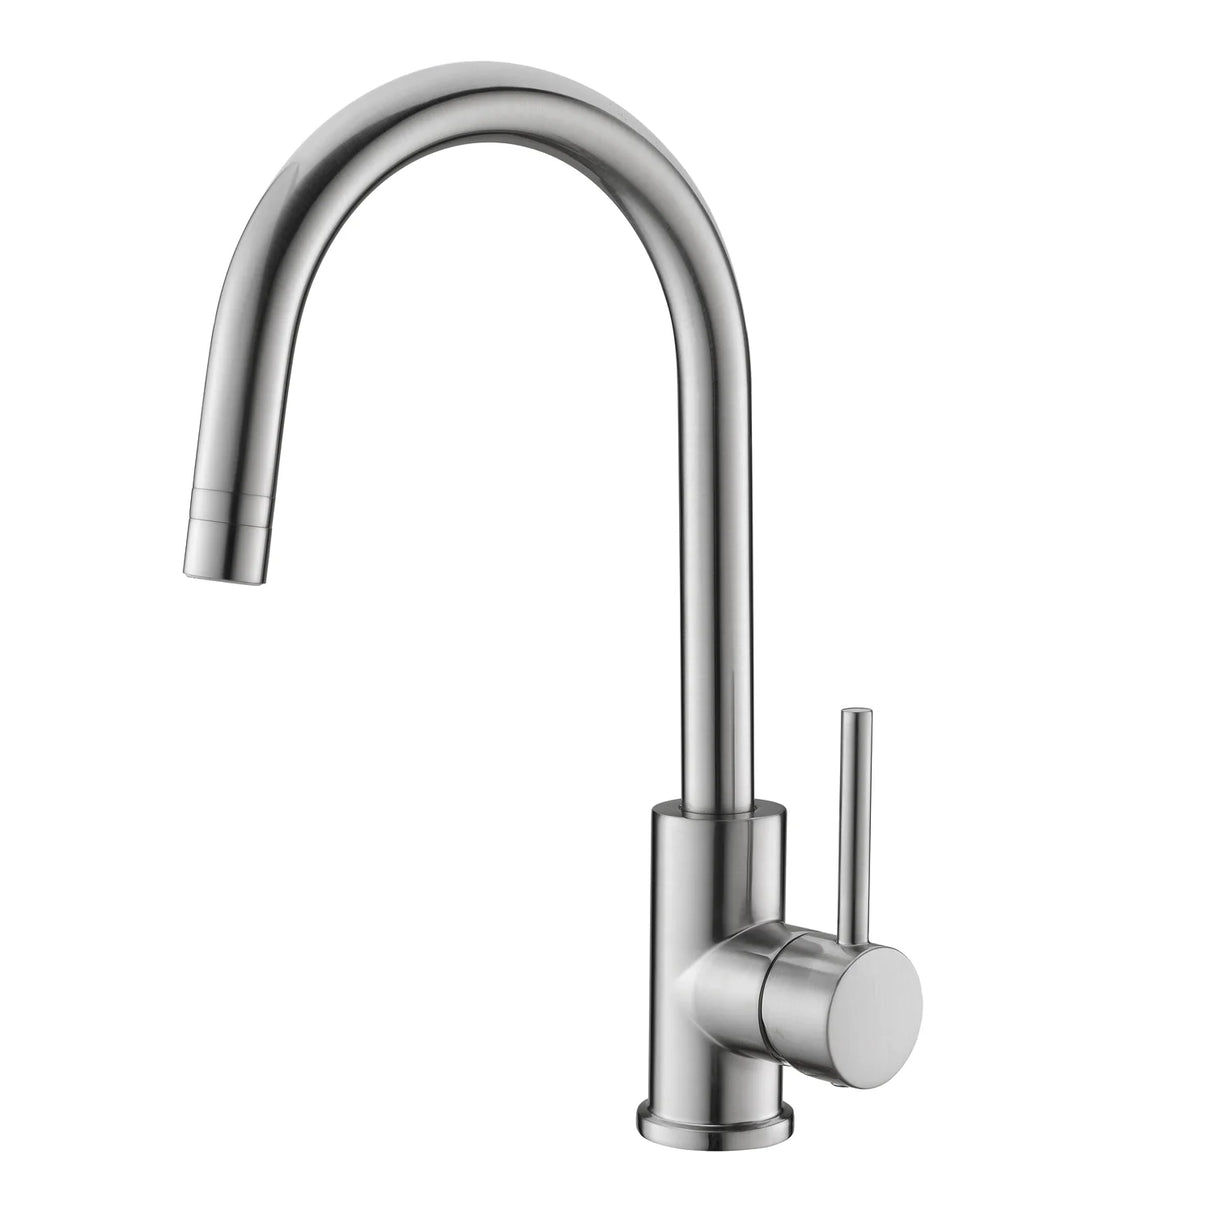 DAX-6515-BN SINGLE HANDLE KITCHEN FAUCET WITH SWIVEL SPOUT, BRASS BODY, BRUSHED NICKEL FINISH, 7-1/4 X 13-11/16 INCHES